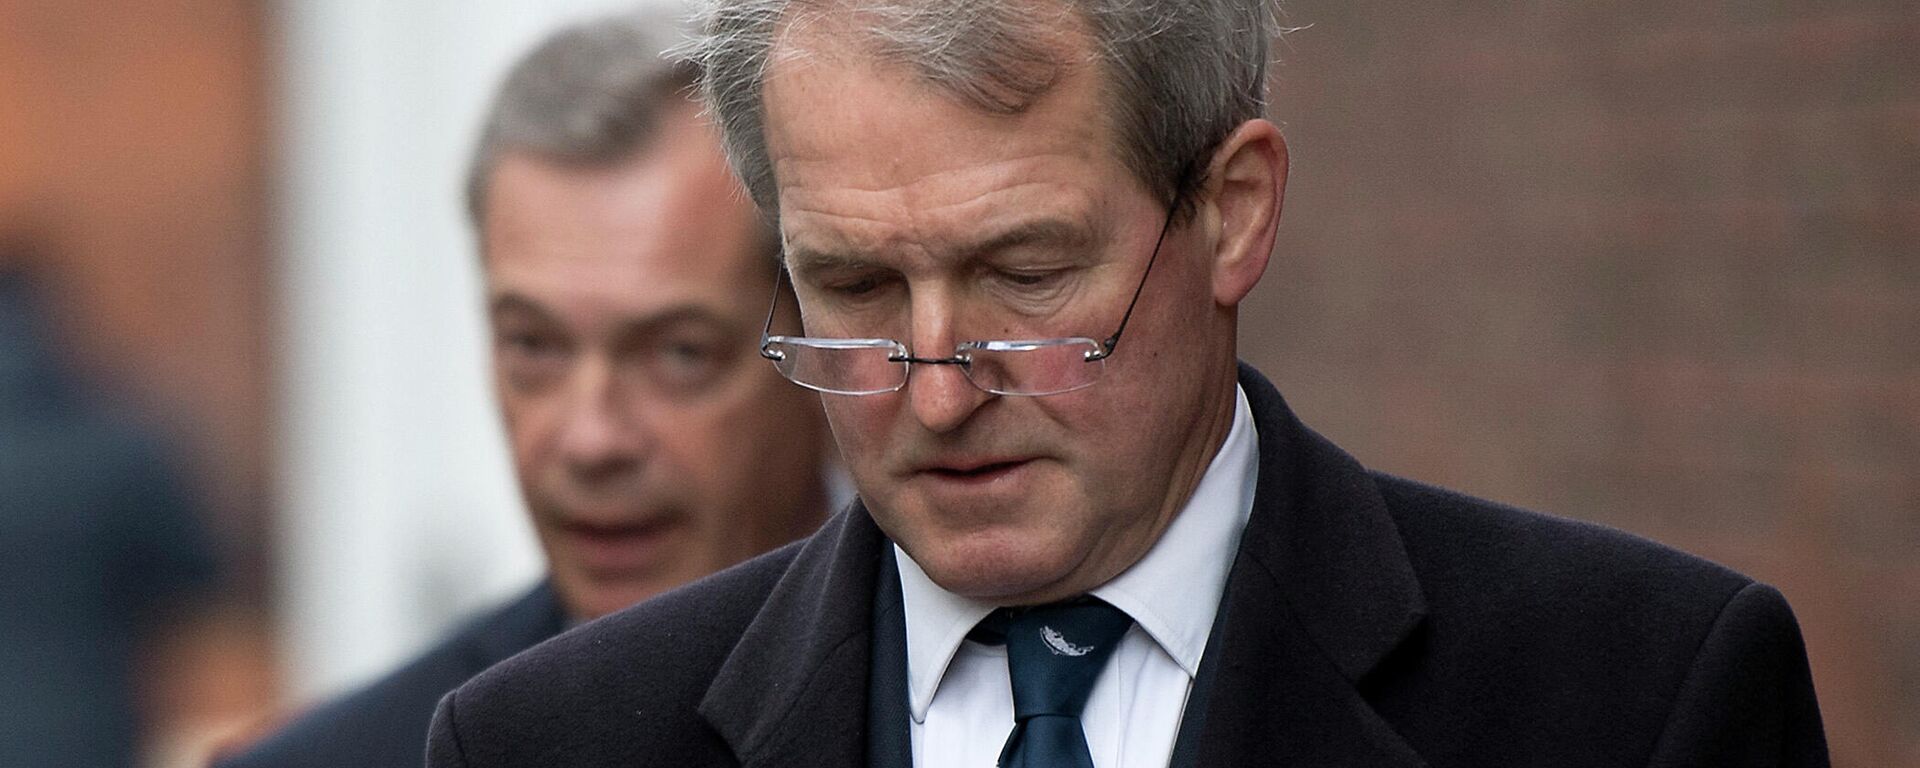 Conservative MP Owen Paterson (R) and former UK Independence Party (UKIP) leader Nigel Farage arrive for a press conference on the impact of Brexit on the fisheries industry in London on February 28, 2017 - Sputnik International, 1920, 05.11.2021